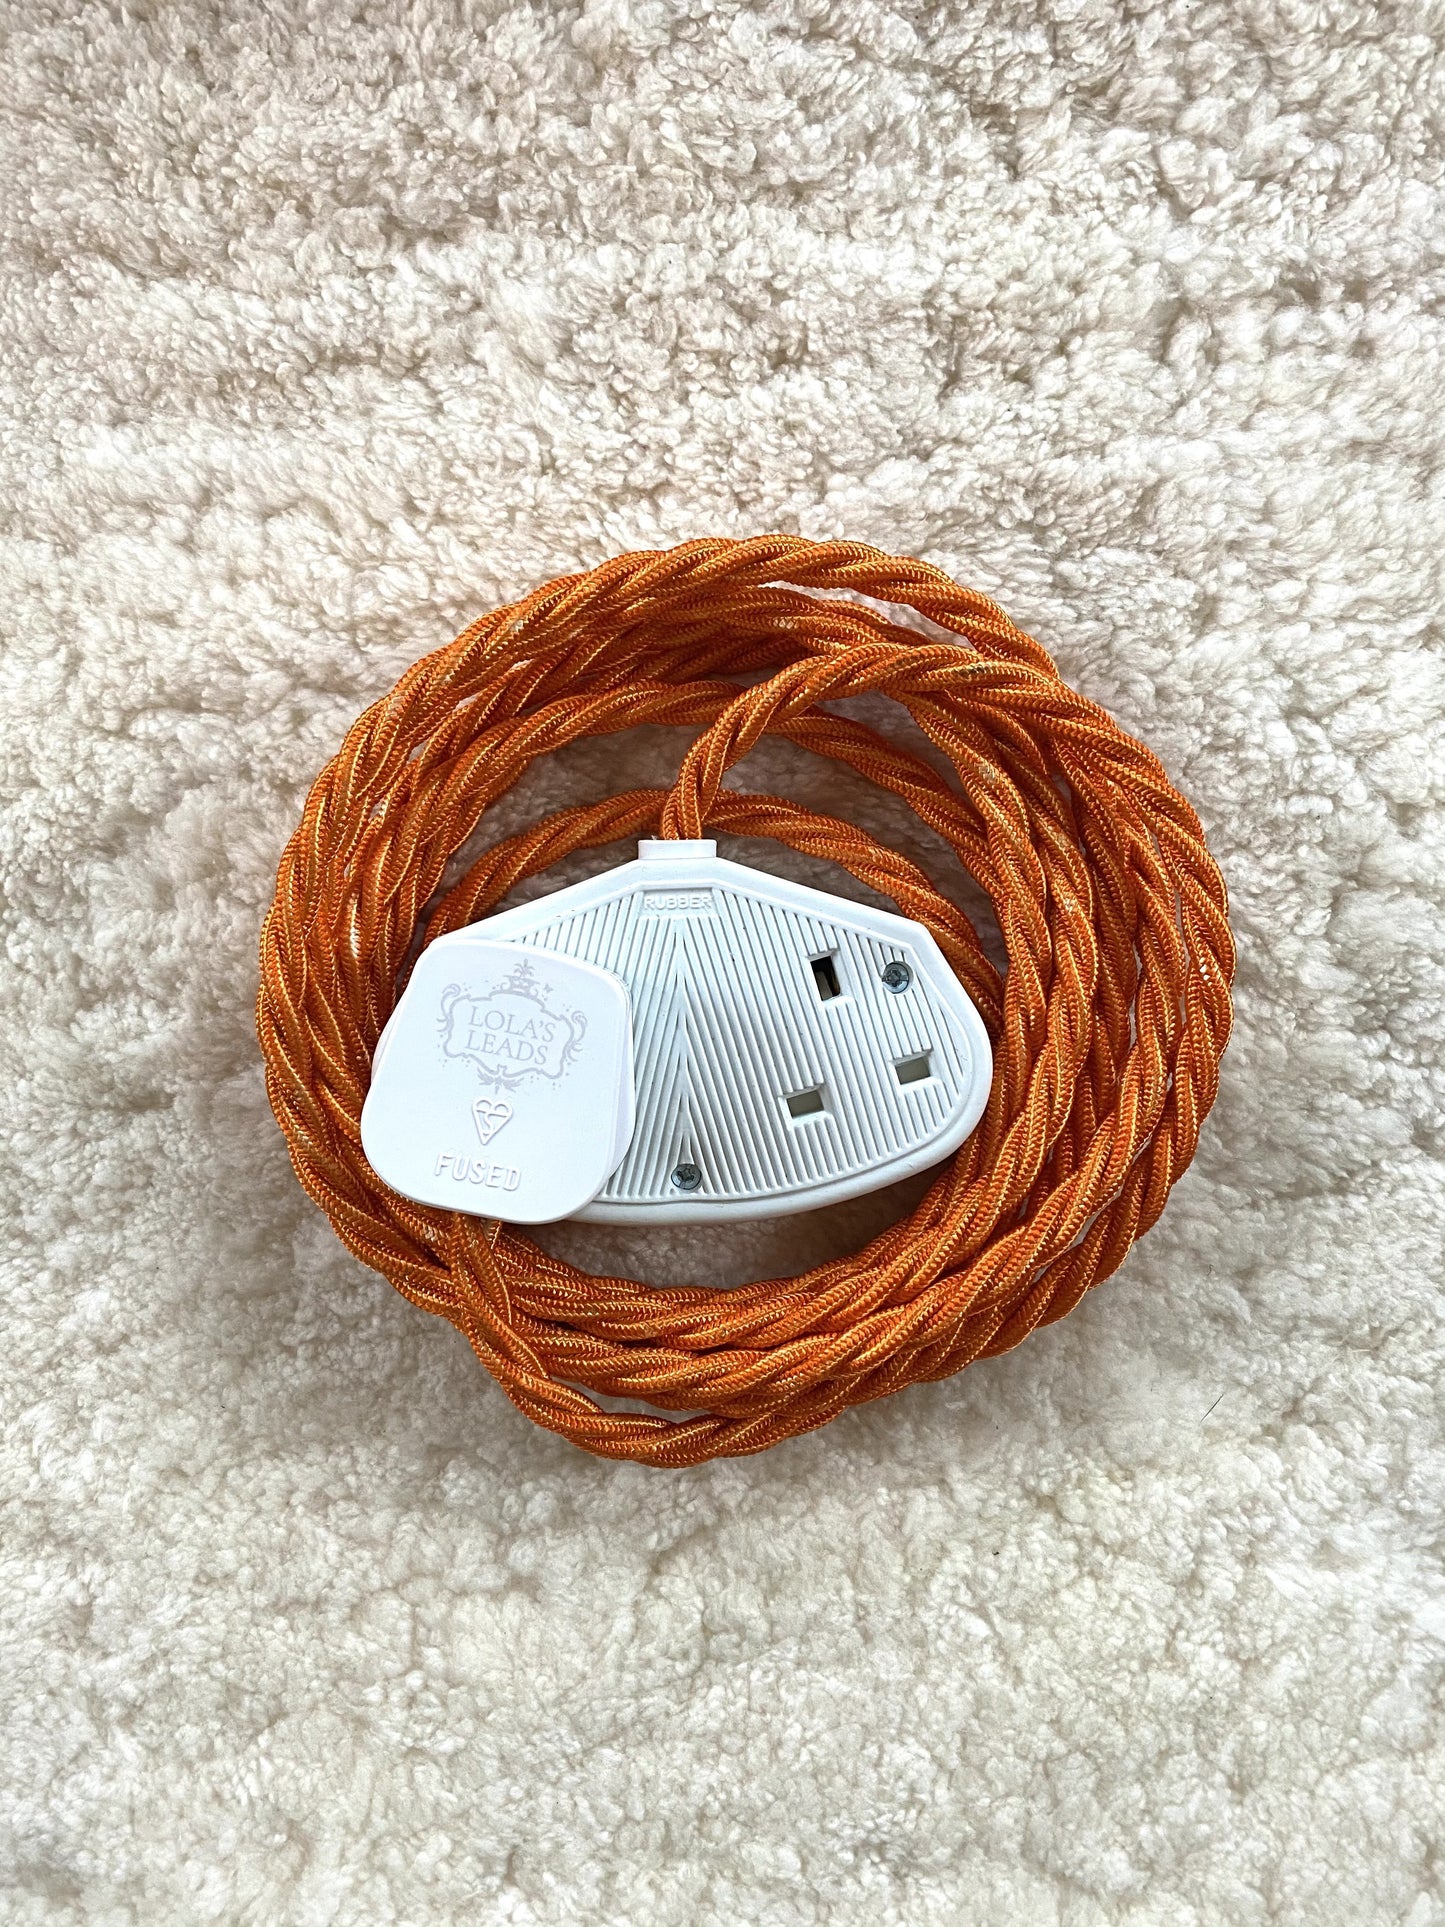 Lola's Leads - Clementine & White 3m